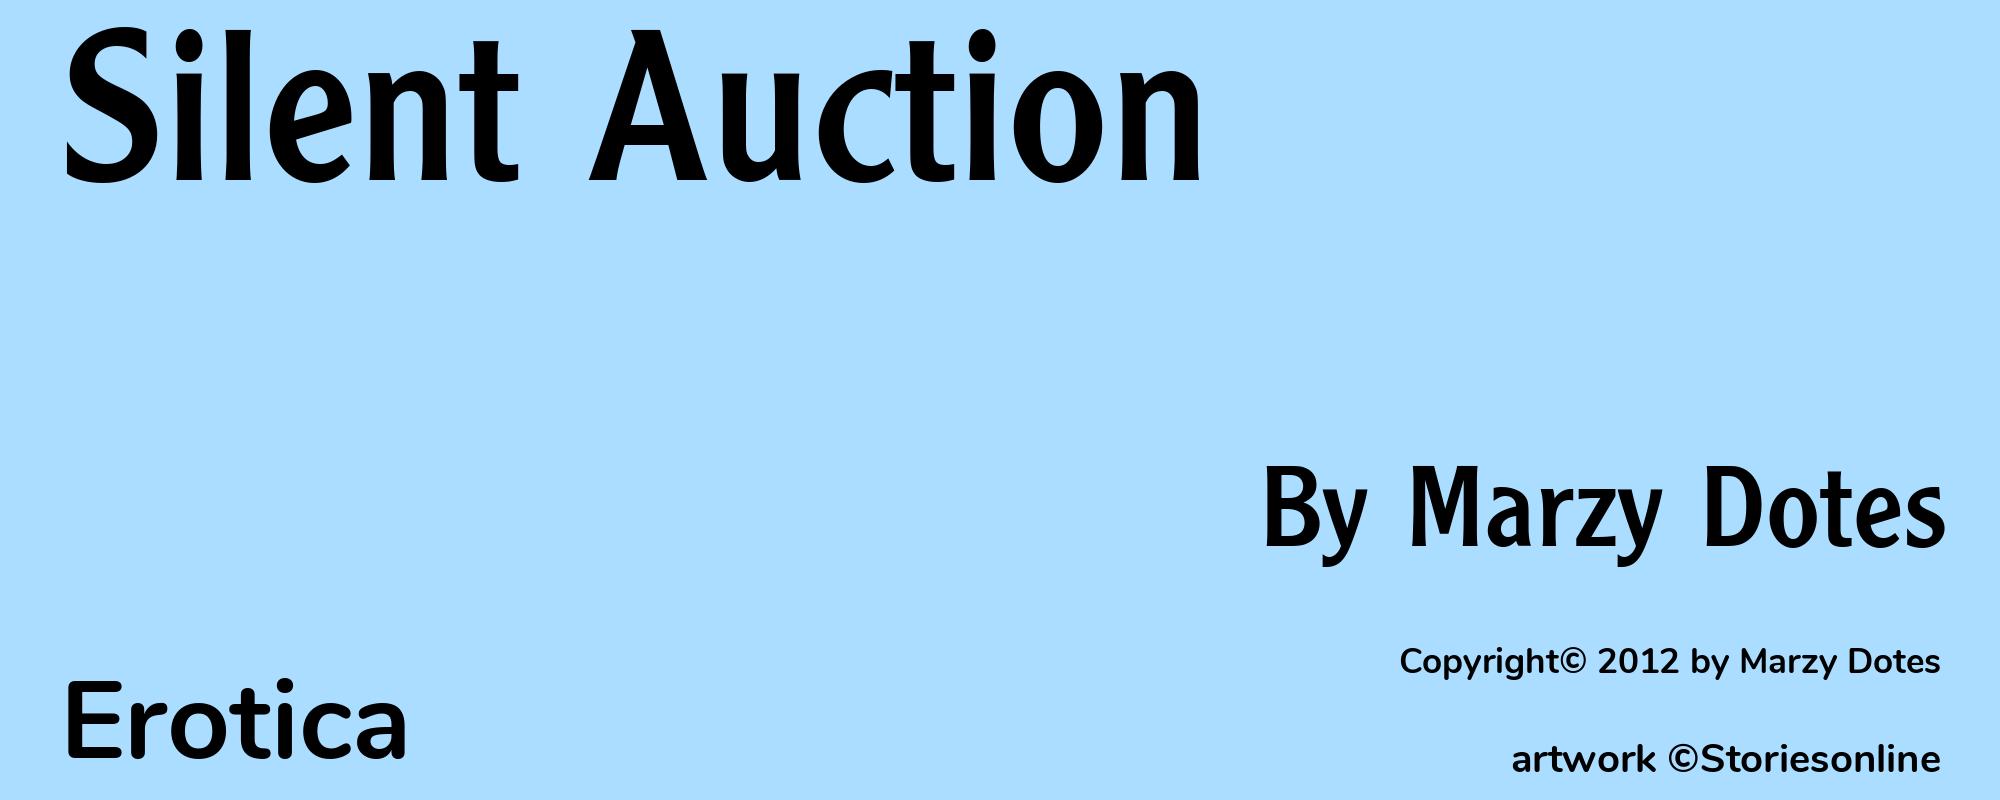 Silent Auction - Cover